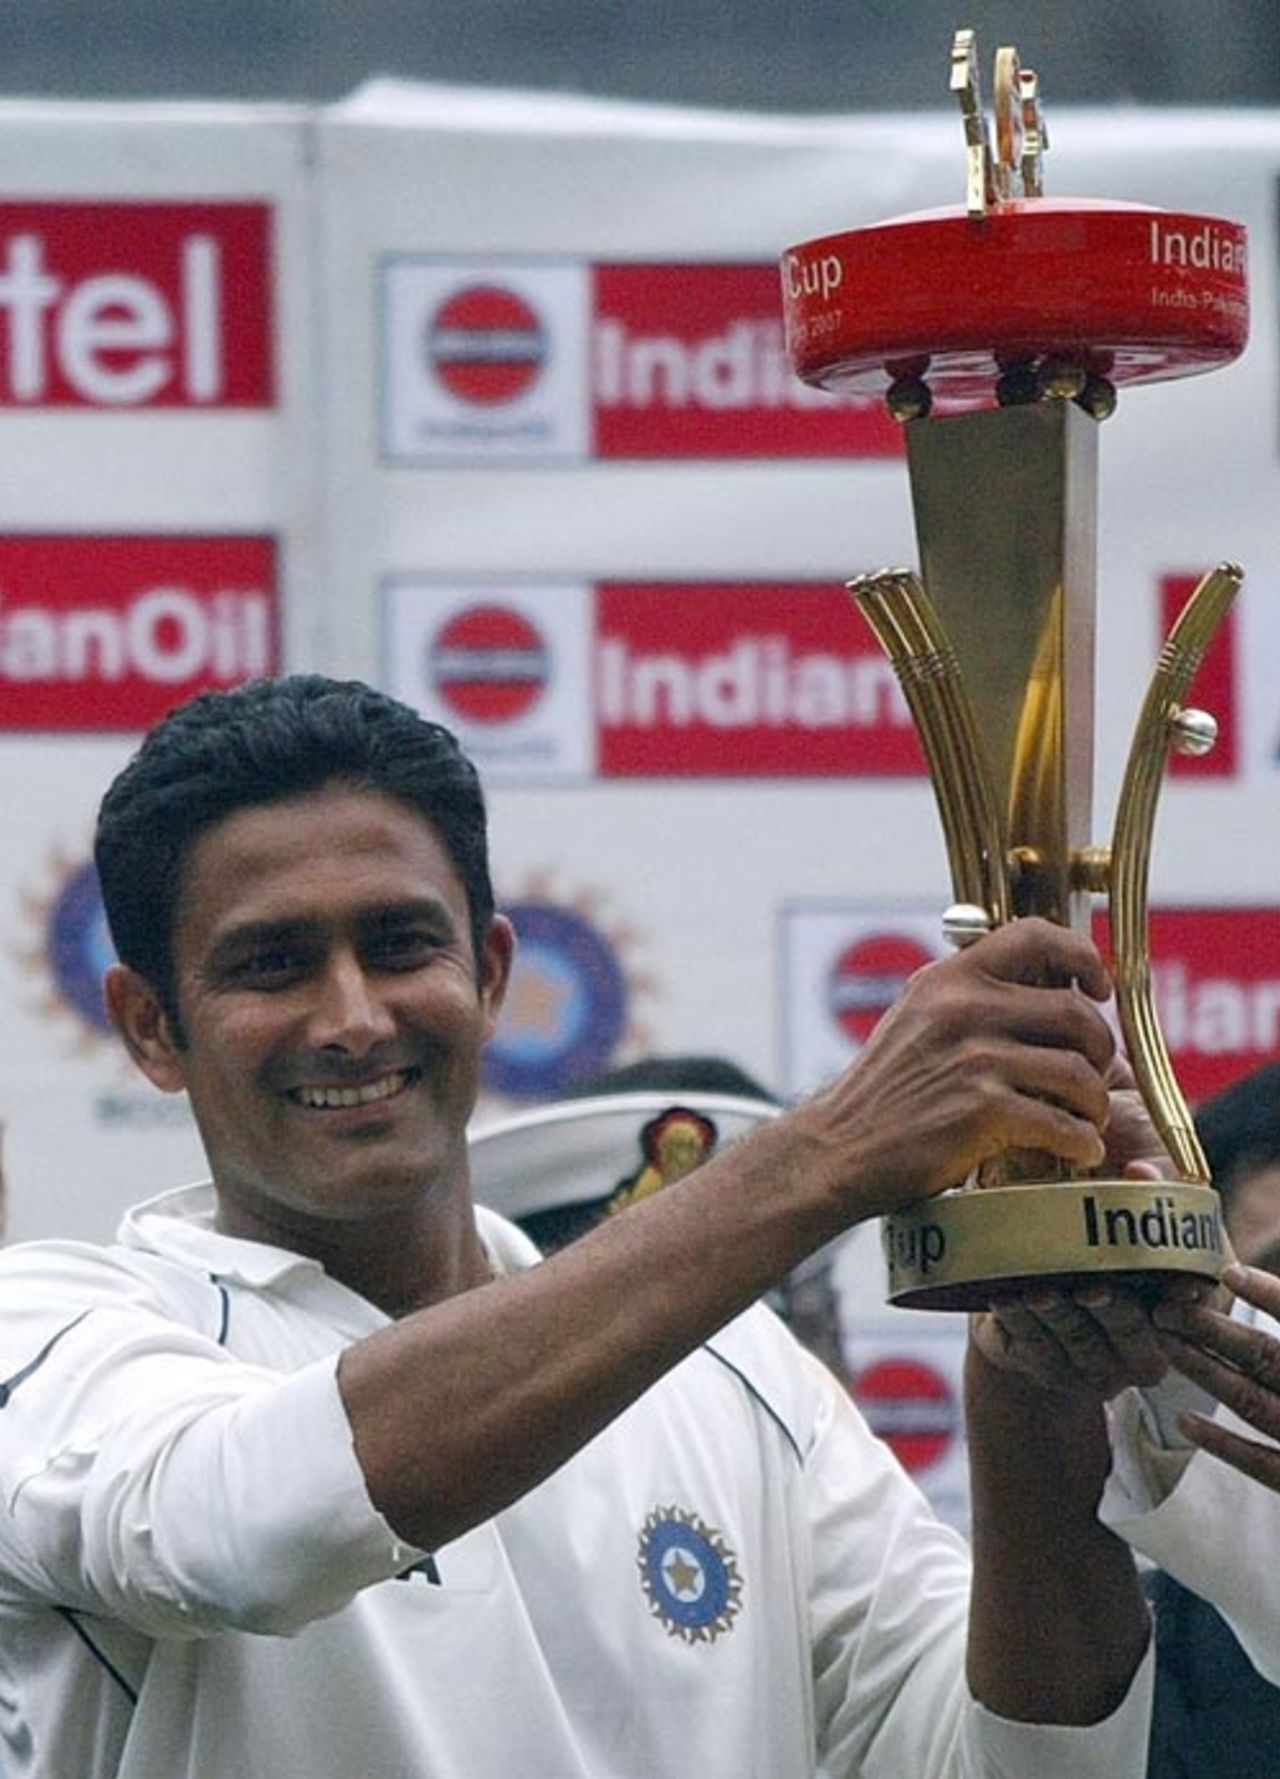 Anil Kumble is all smiles as he holds aloft the trophy, India v Pakistan, 3rd Test, Bangalore, 5th day, December 12, 2007 

